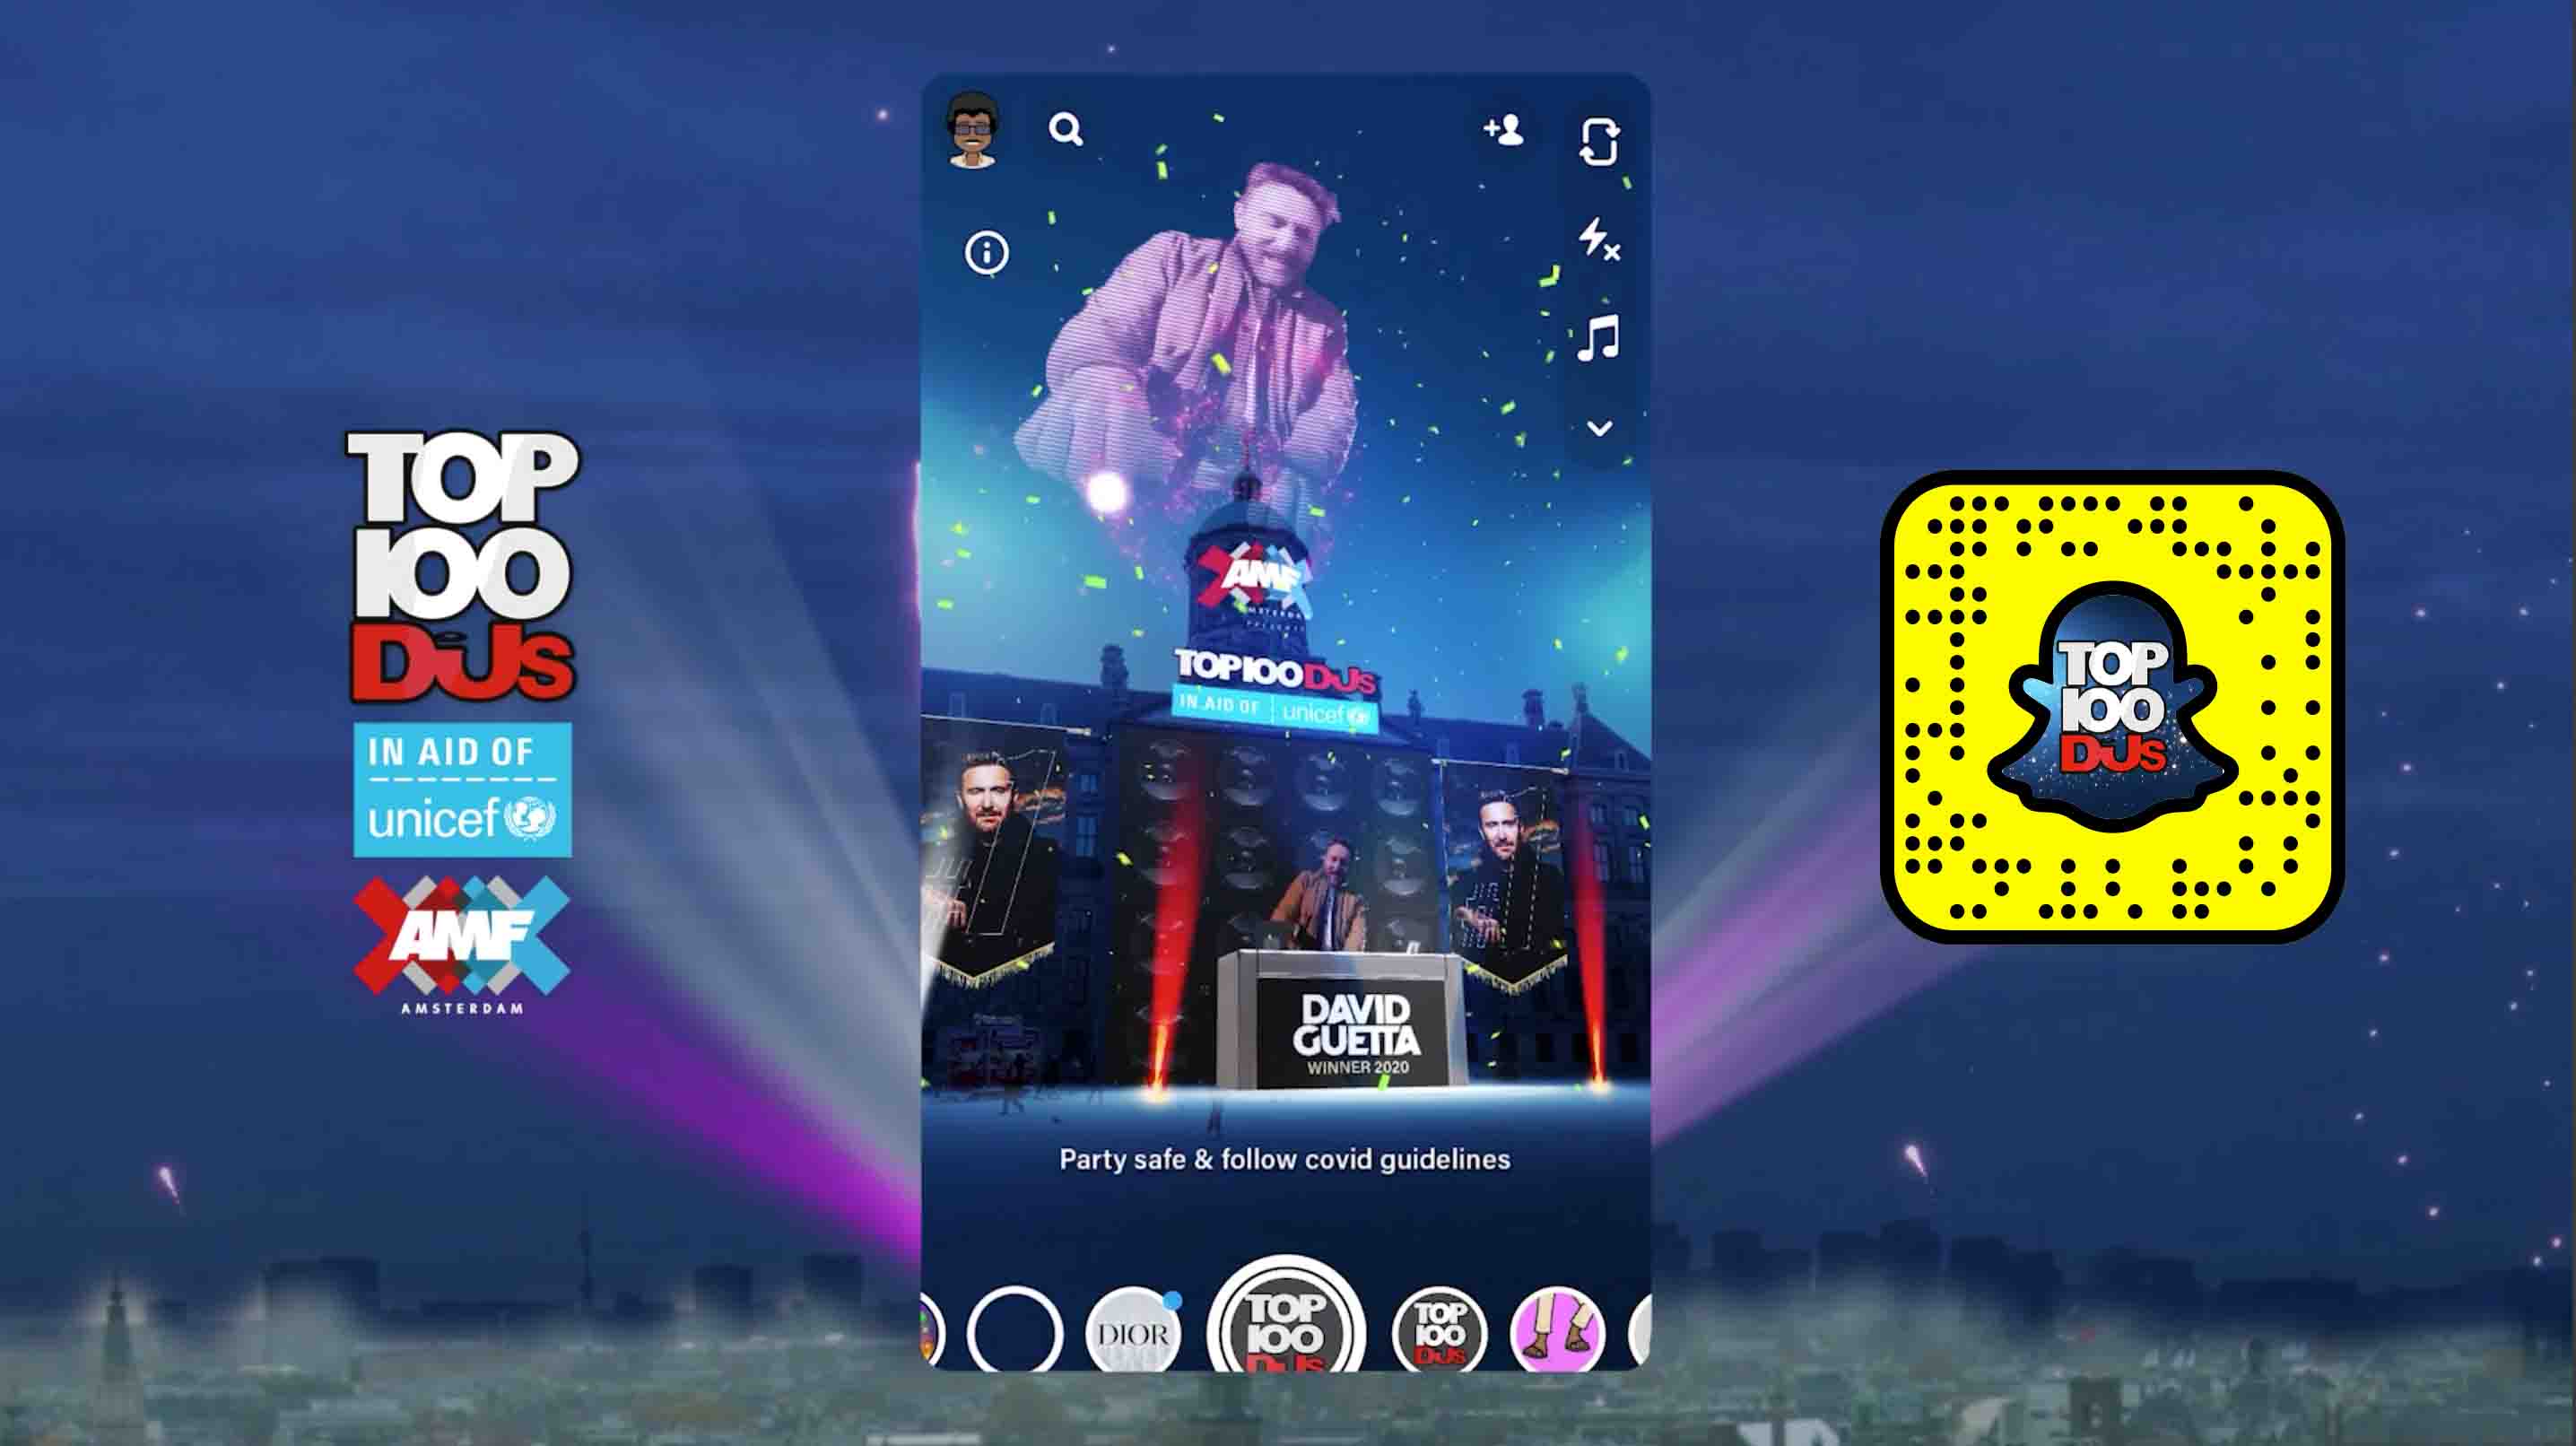 Dj Mag Partners With Snapchat To Present David Guetta In Ar Djmag Com